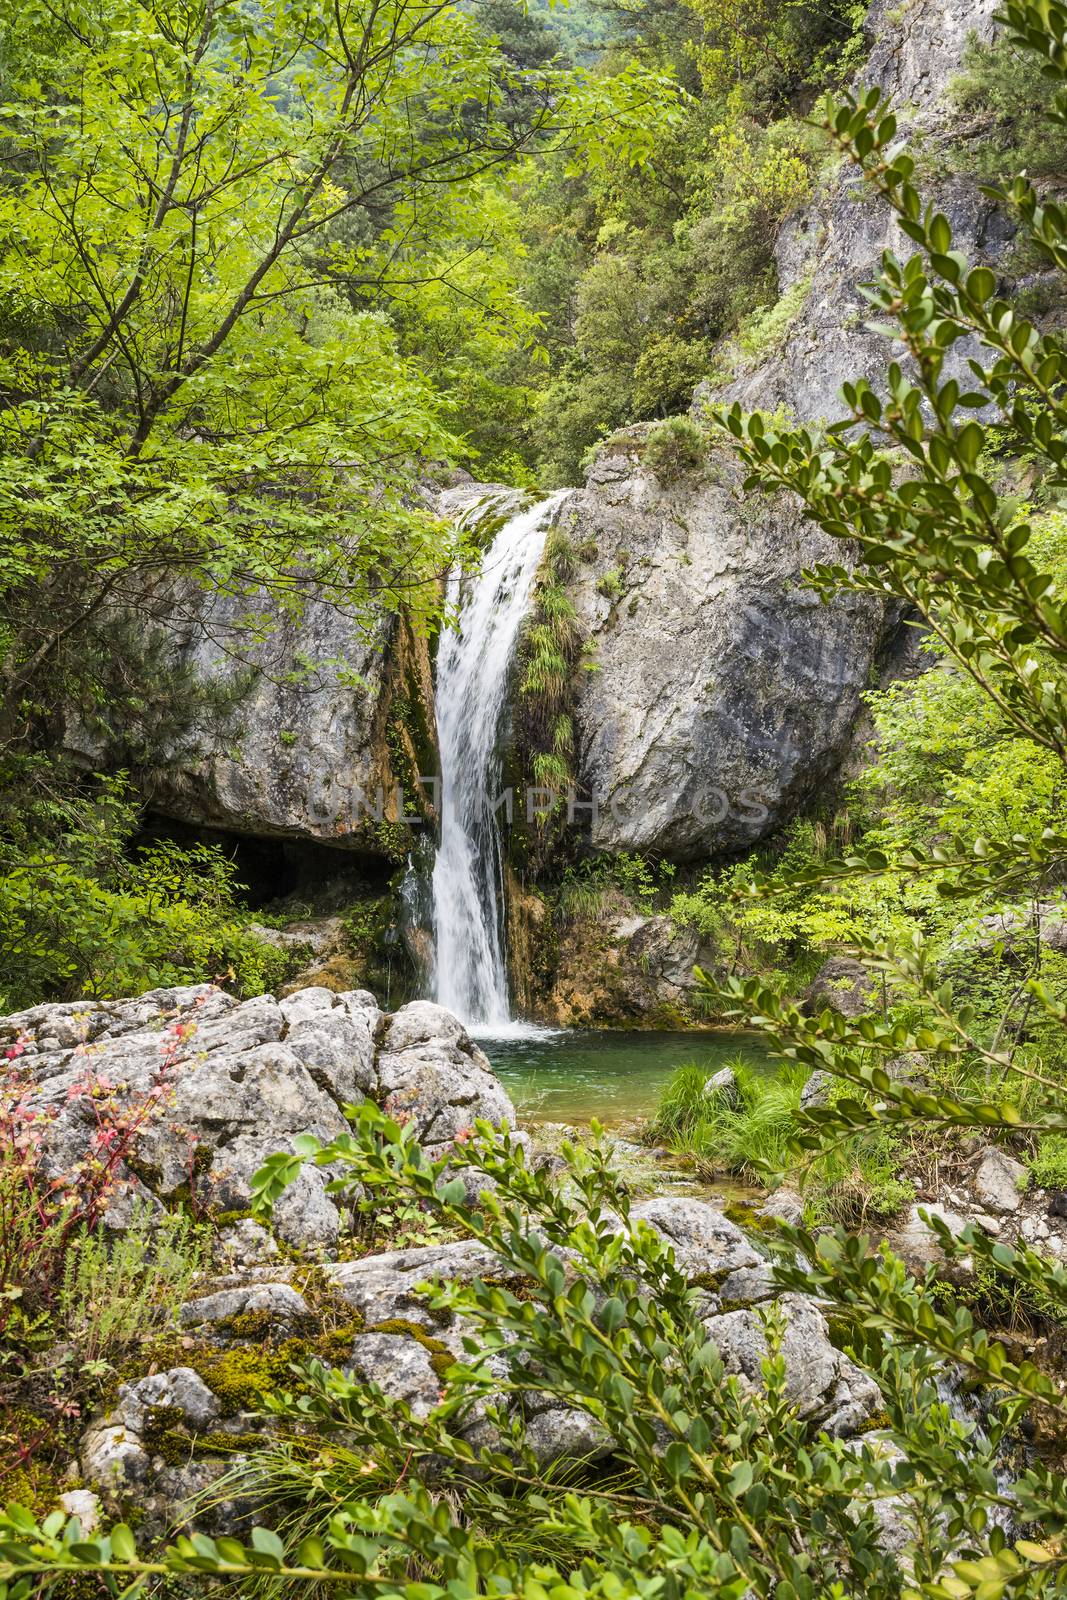 Ourlia forest waterfalls at Olympus mountain, Greece